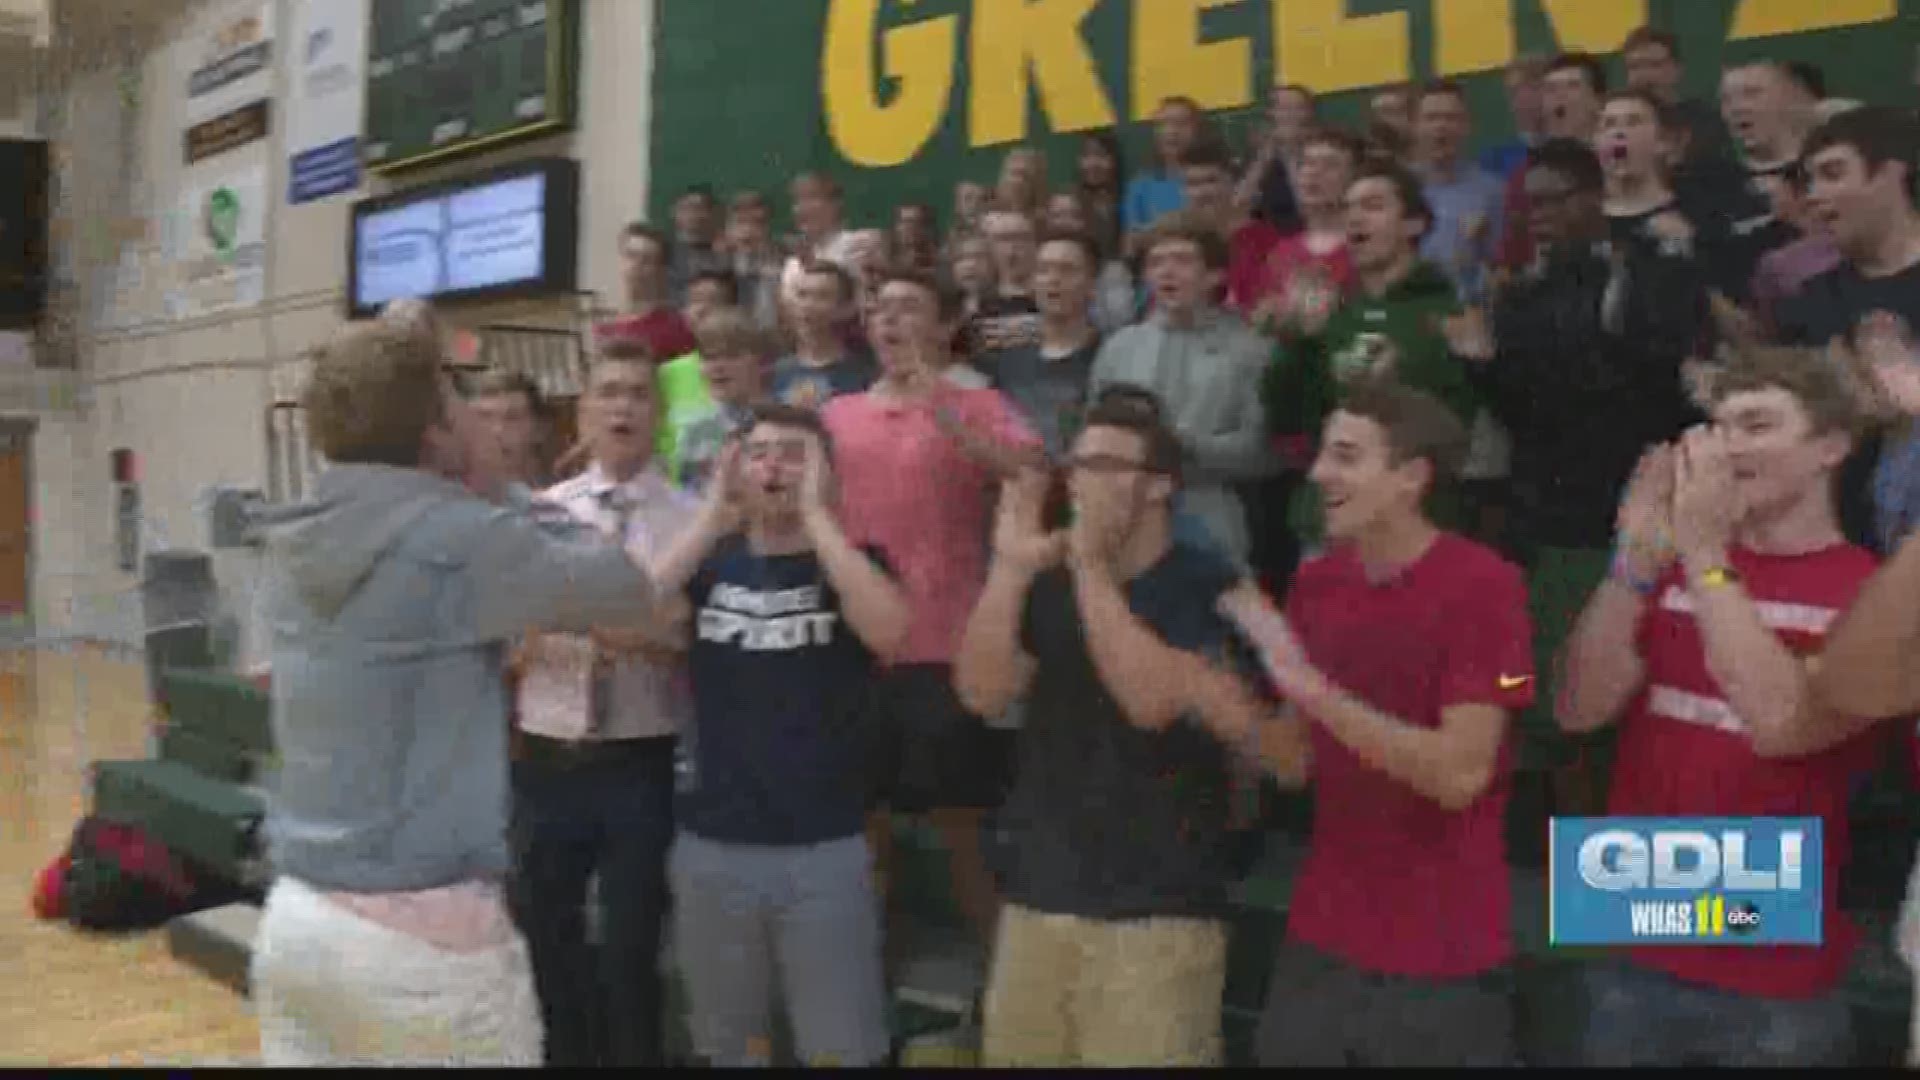 Floyd Central High School gears up to take on rival Providence in week two of WHAS11's 2017 HS GameTime Game of the Week on August, 25, 2017 at 7:00 PM. Angie Fenton heads to Floyd Central to see some pregame hype, as well as check out some musical talent